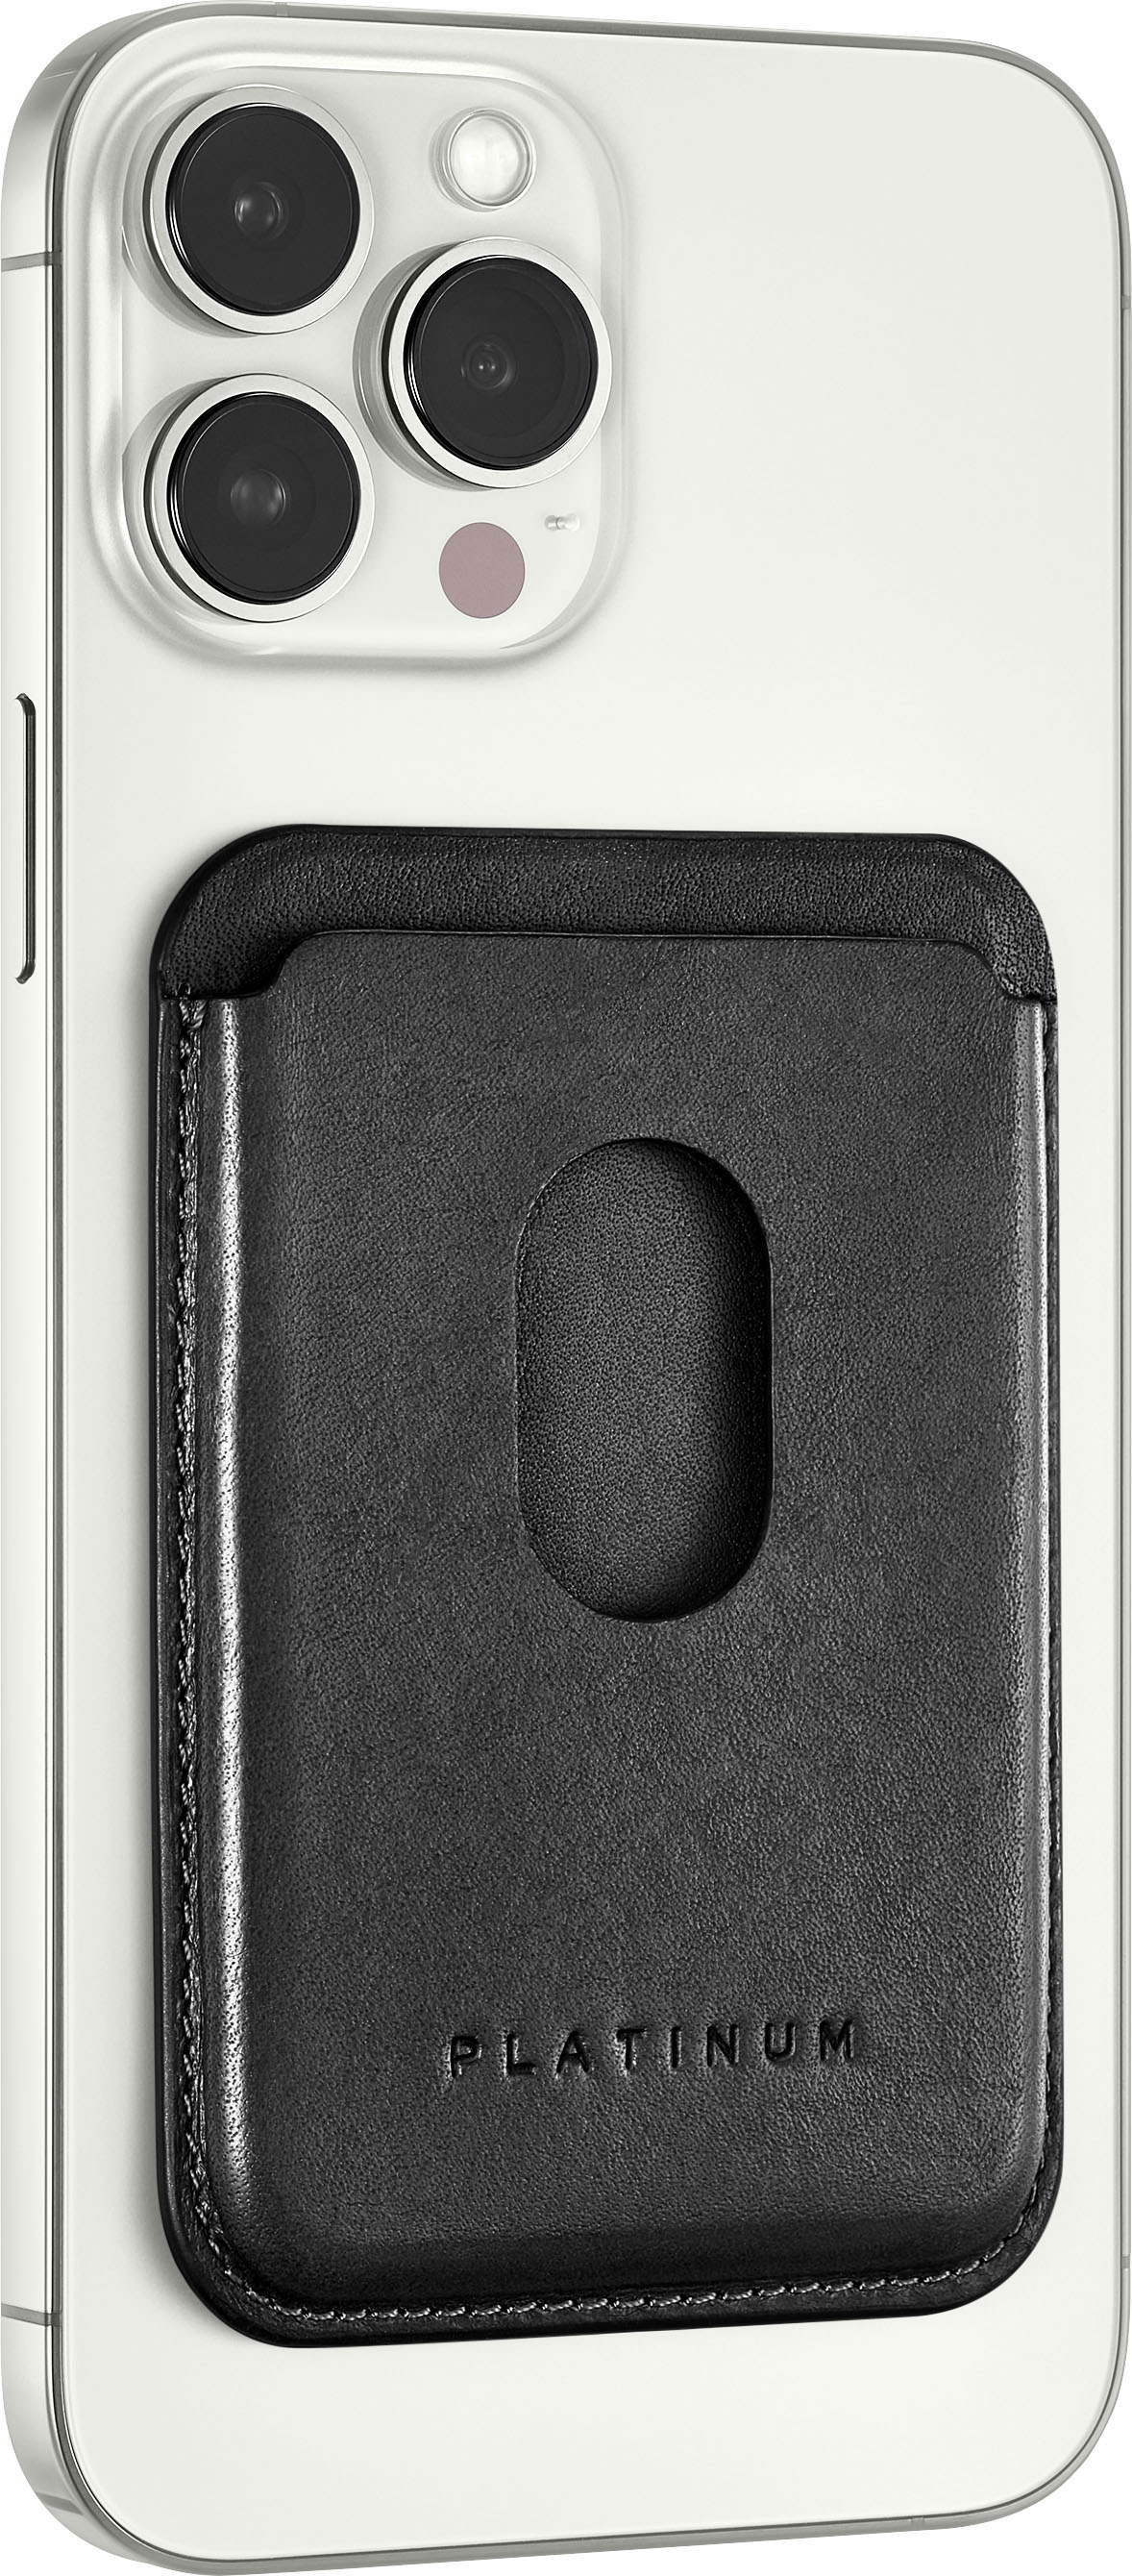 Case-Mate Genuine Leather Wallet Folio Case for Apple iPhone 11 Pro Max - Black